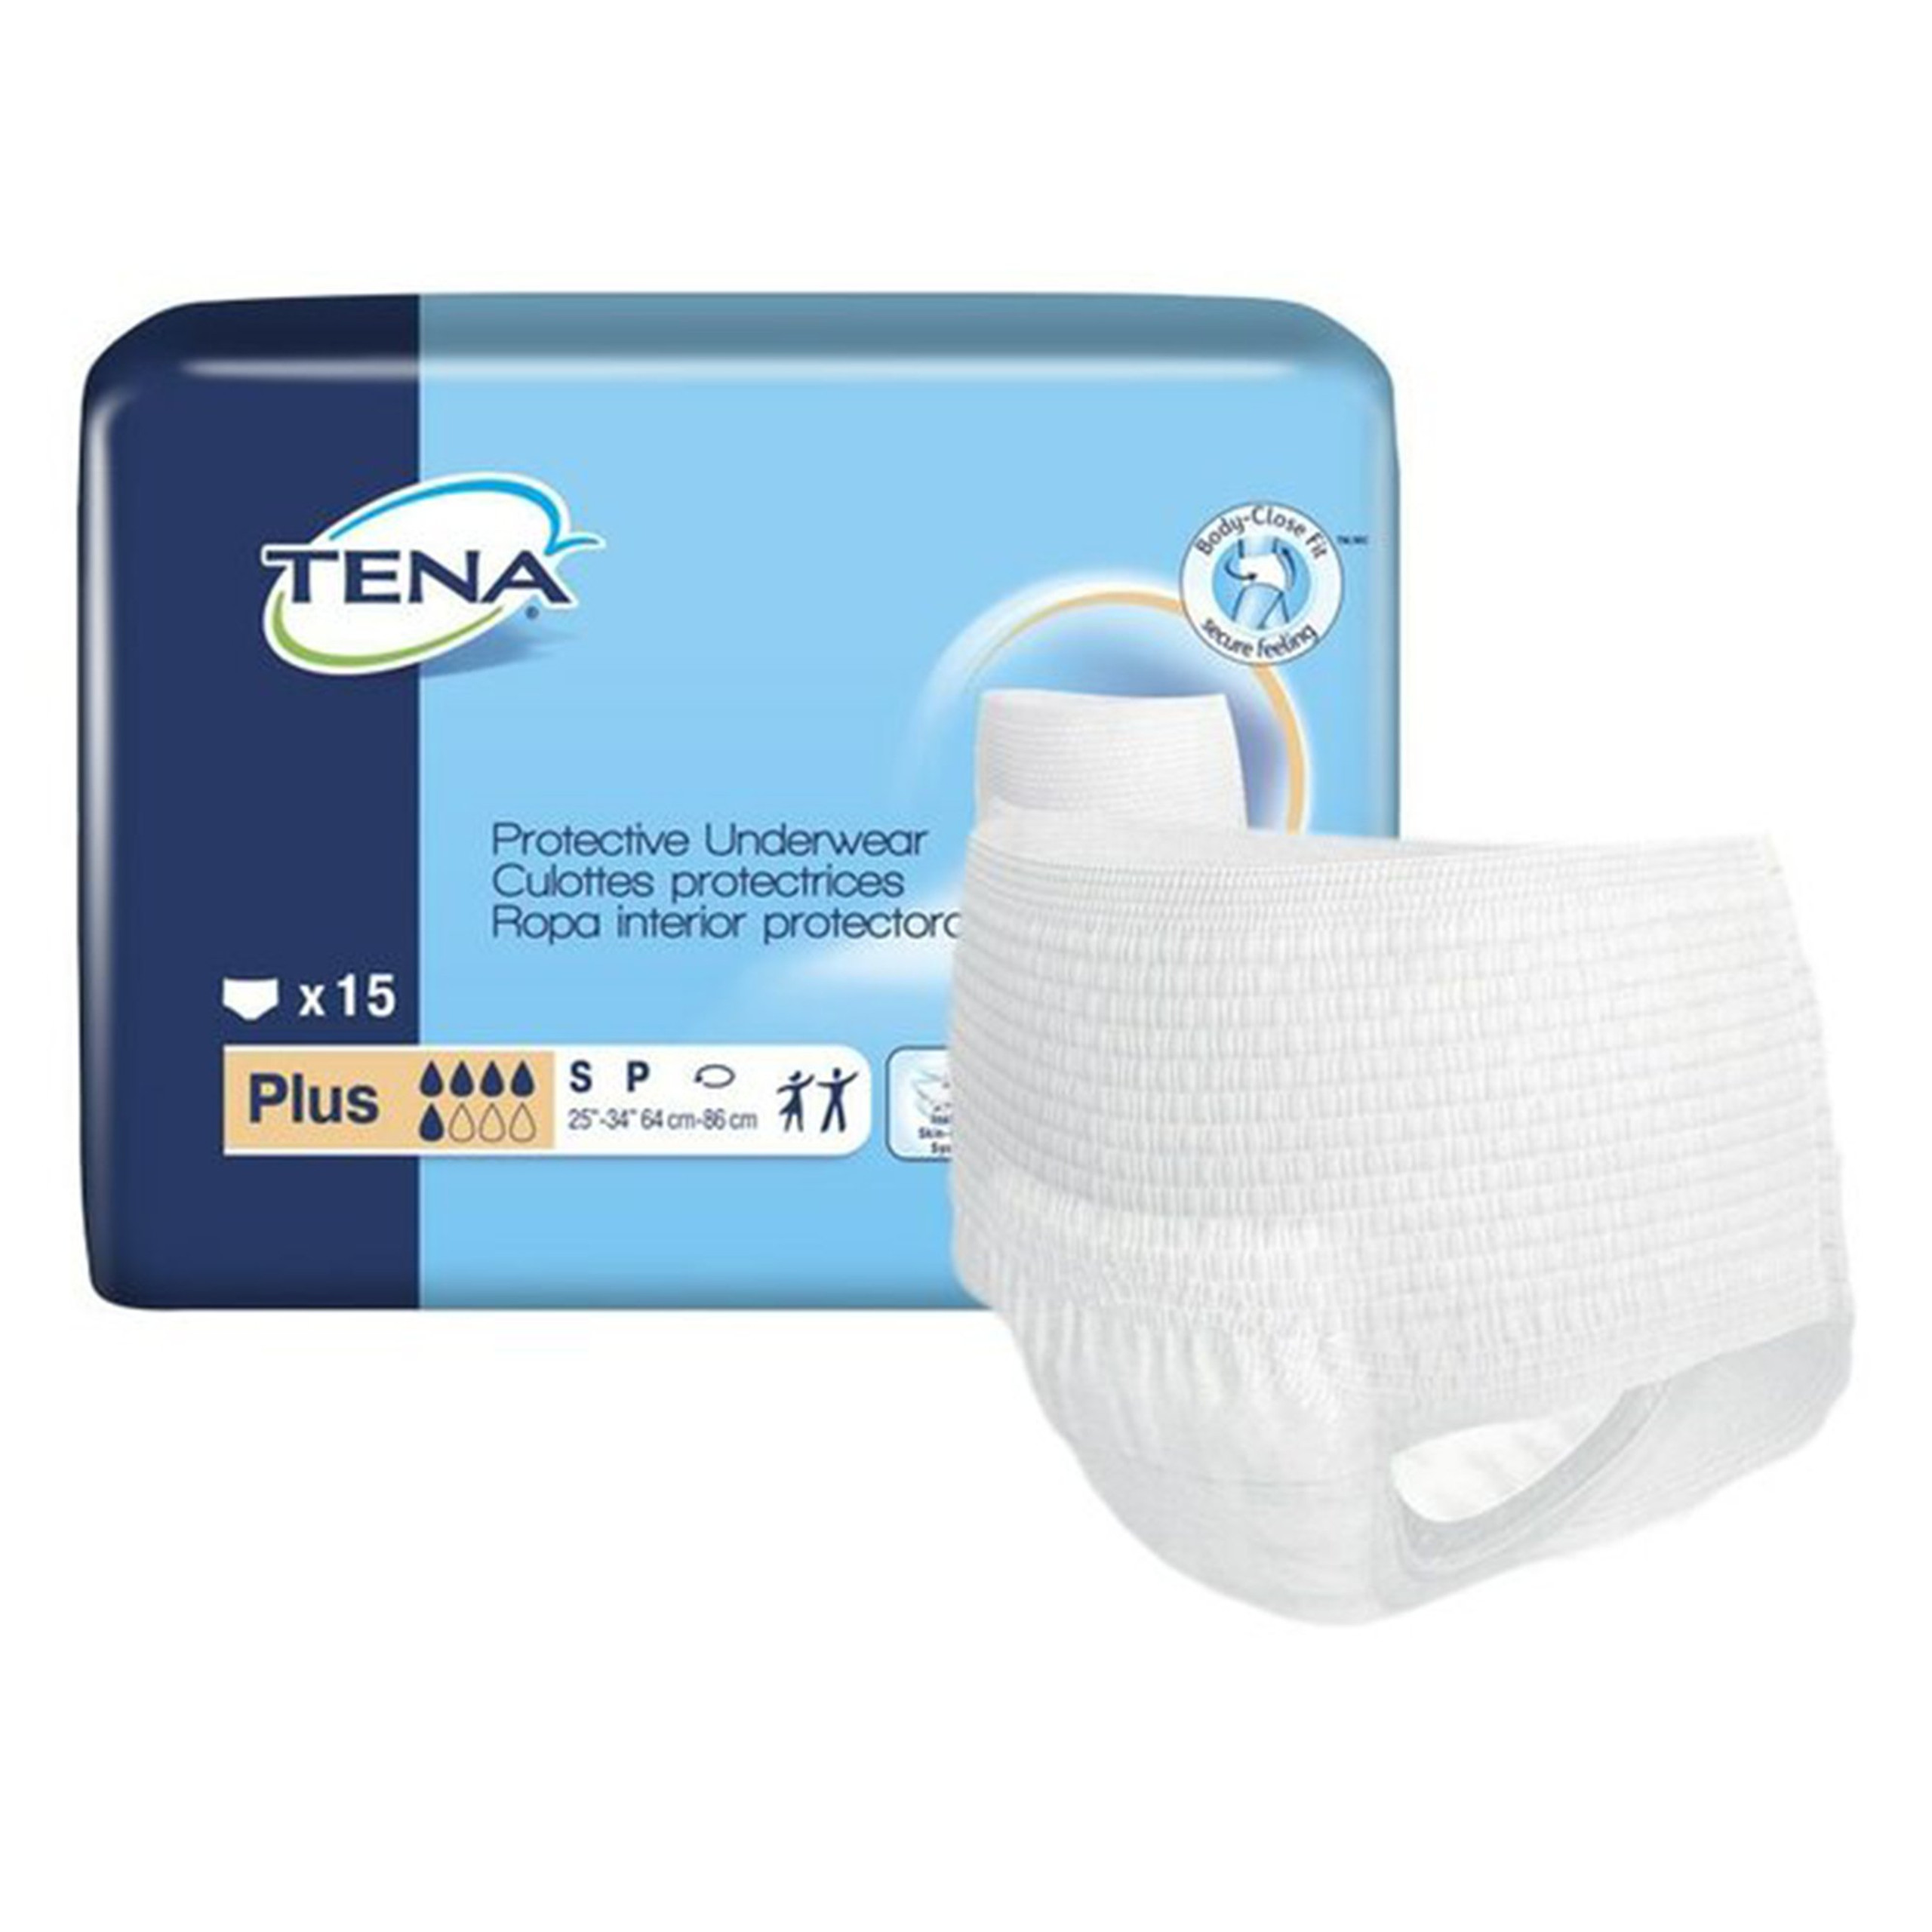 TENA Dry Comfort Incontinence Protective Underwear, Moderate Absorbency ...